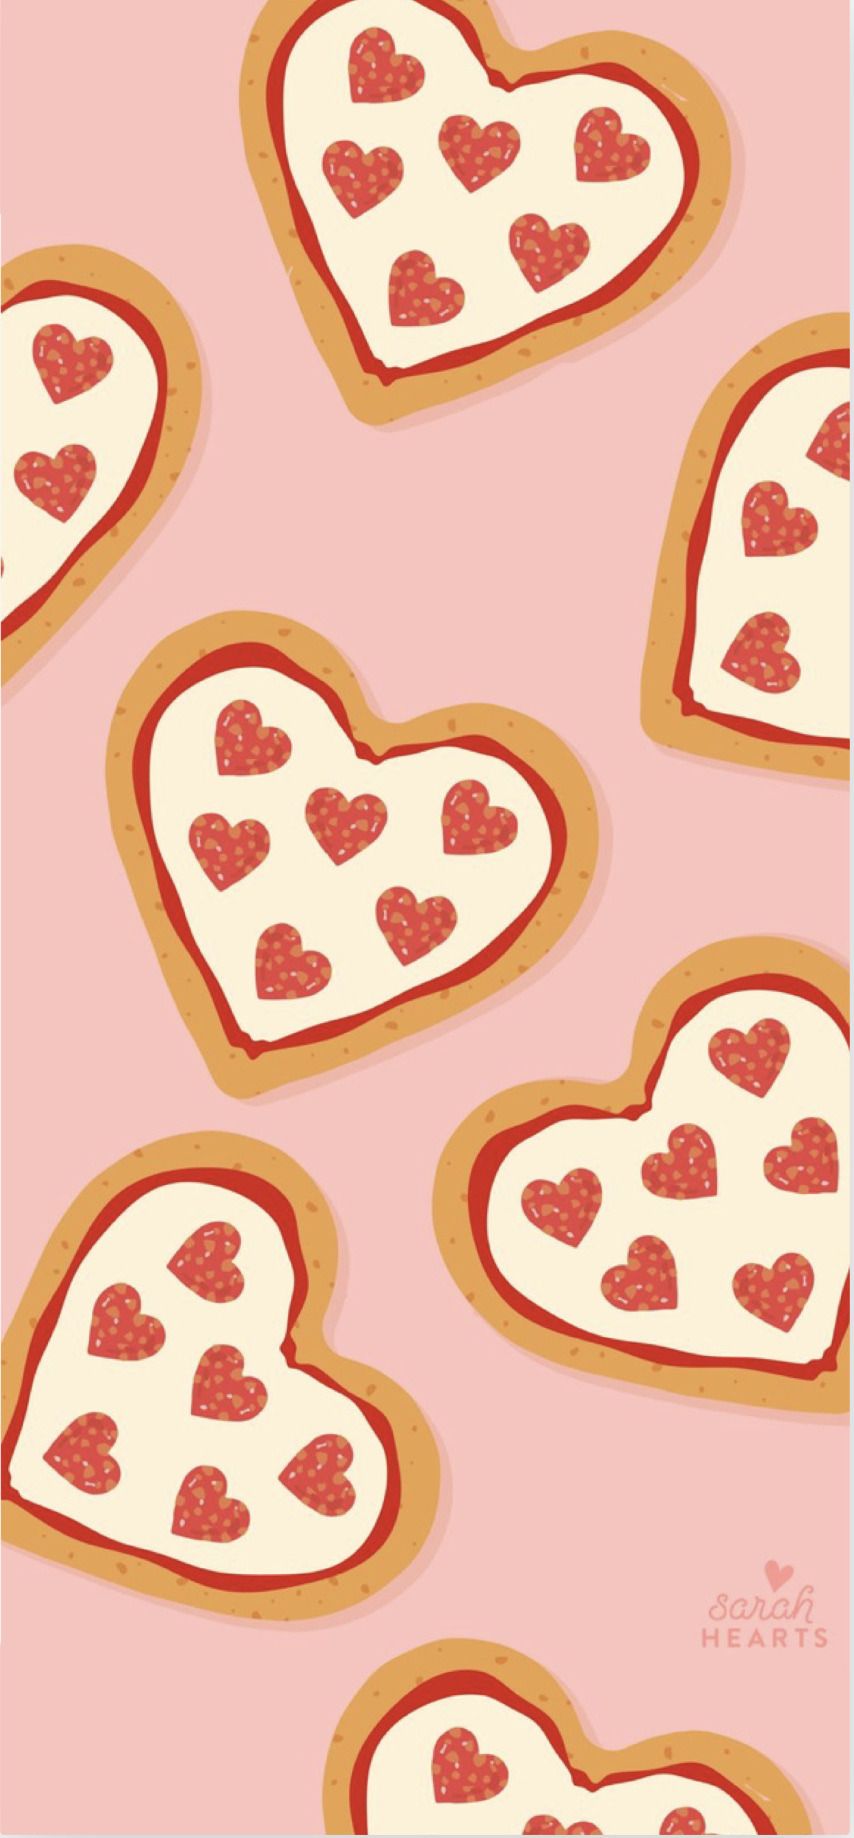 Heart shaped pizza phone background for Valentine's Day - Valentine's Day